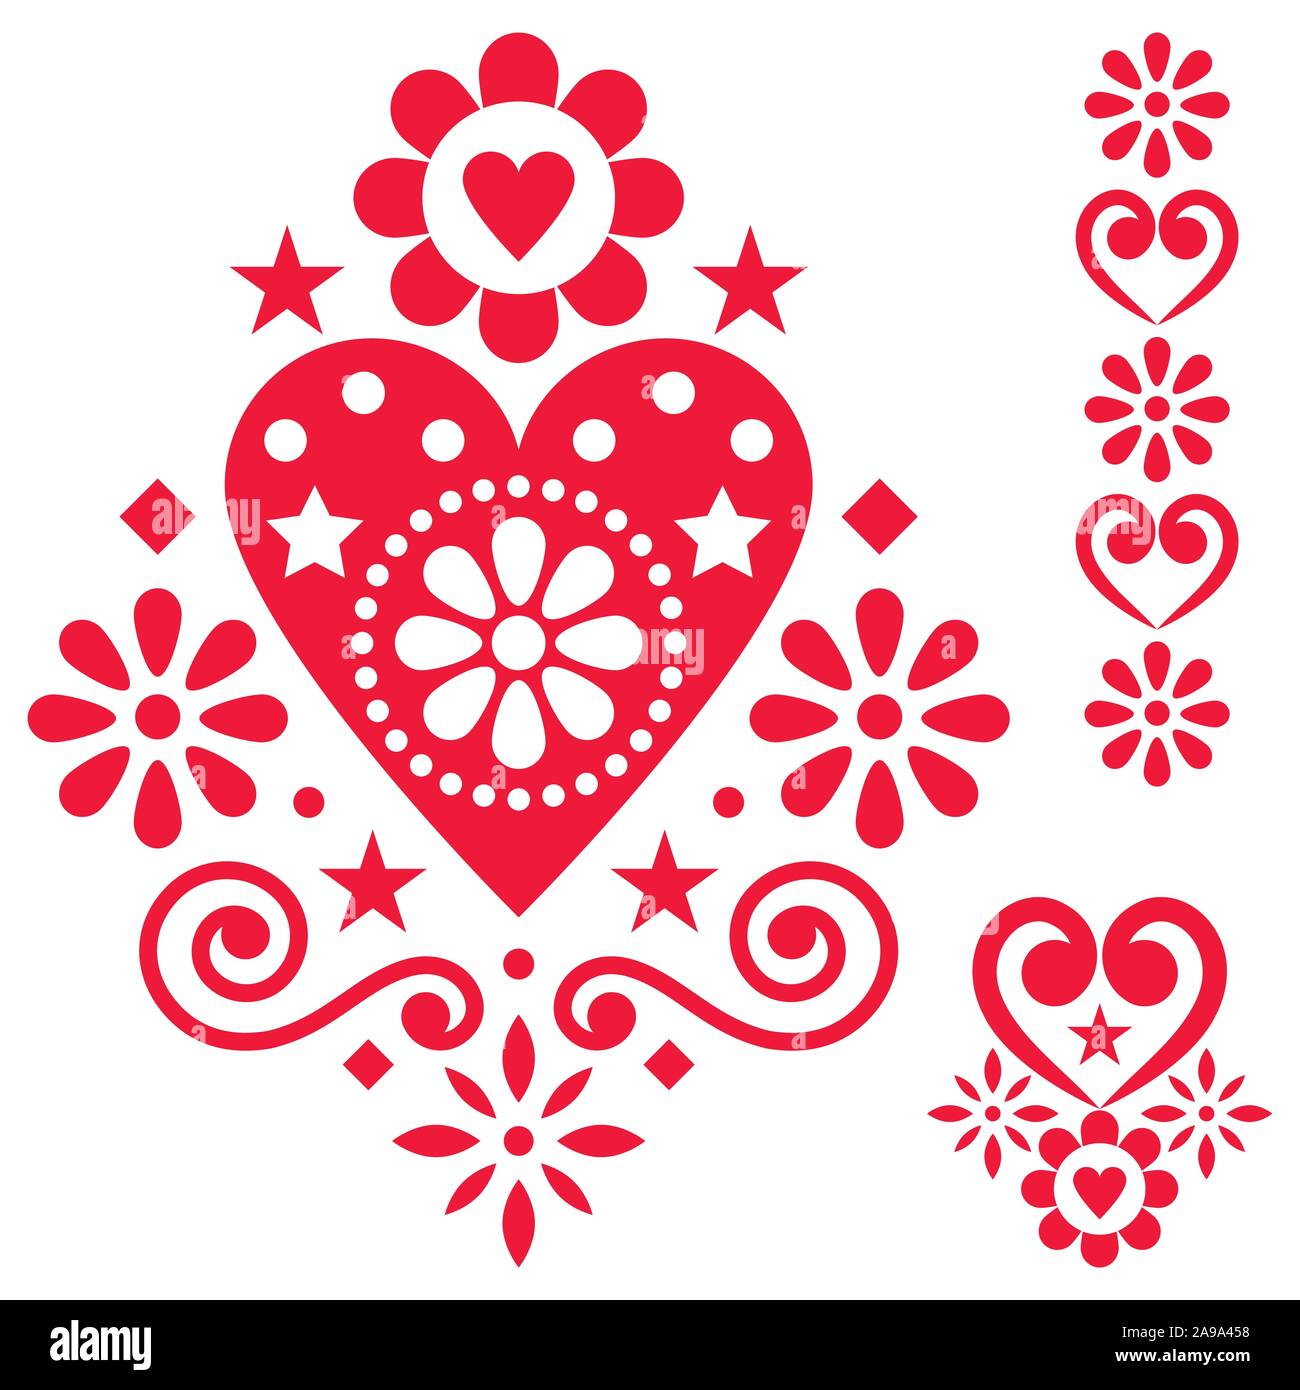 Valentine's Day folk art vector design set for greeting card or wedding invitation - Scandinavian style patterns with hearts and flowers Stock Vector